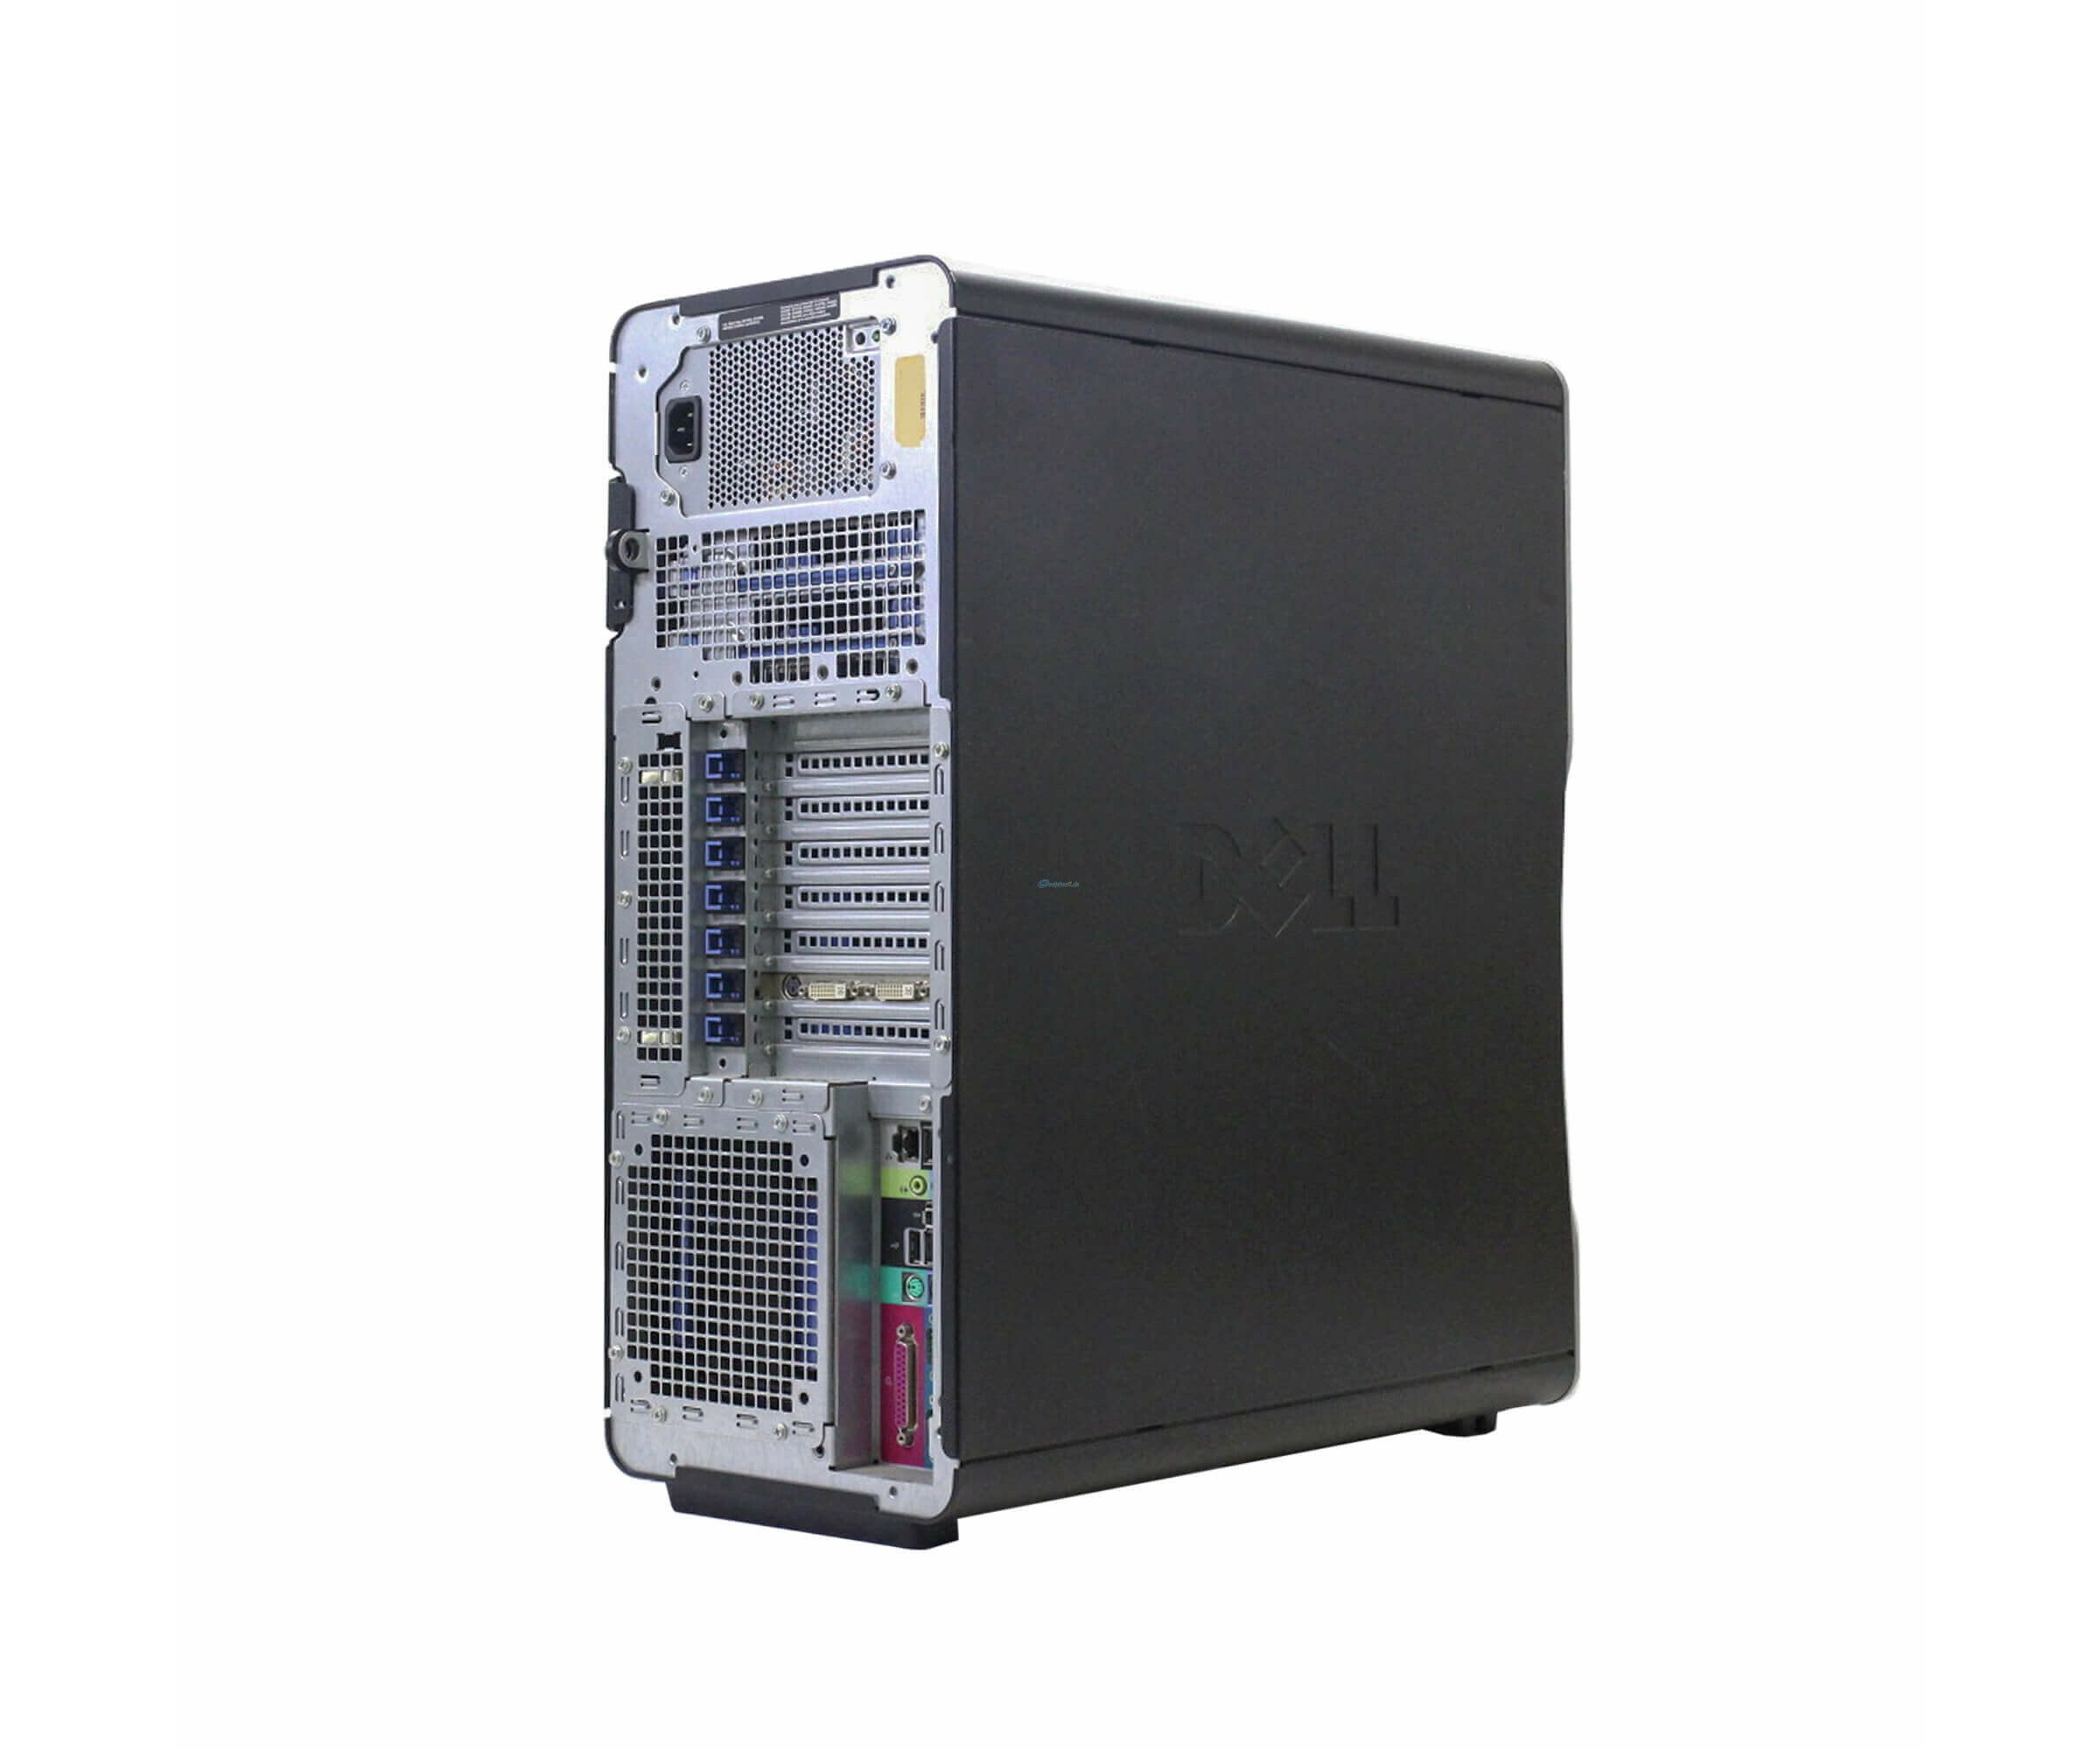 Dell Precision T7400 Workstation | Intel Xeon E5420 2.5Ghz | Ram 8Gb | SSD 256Gb | Windows 10 pro Economical and high-performance workstation